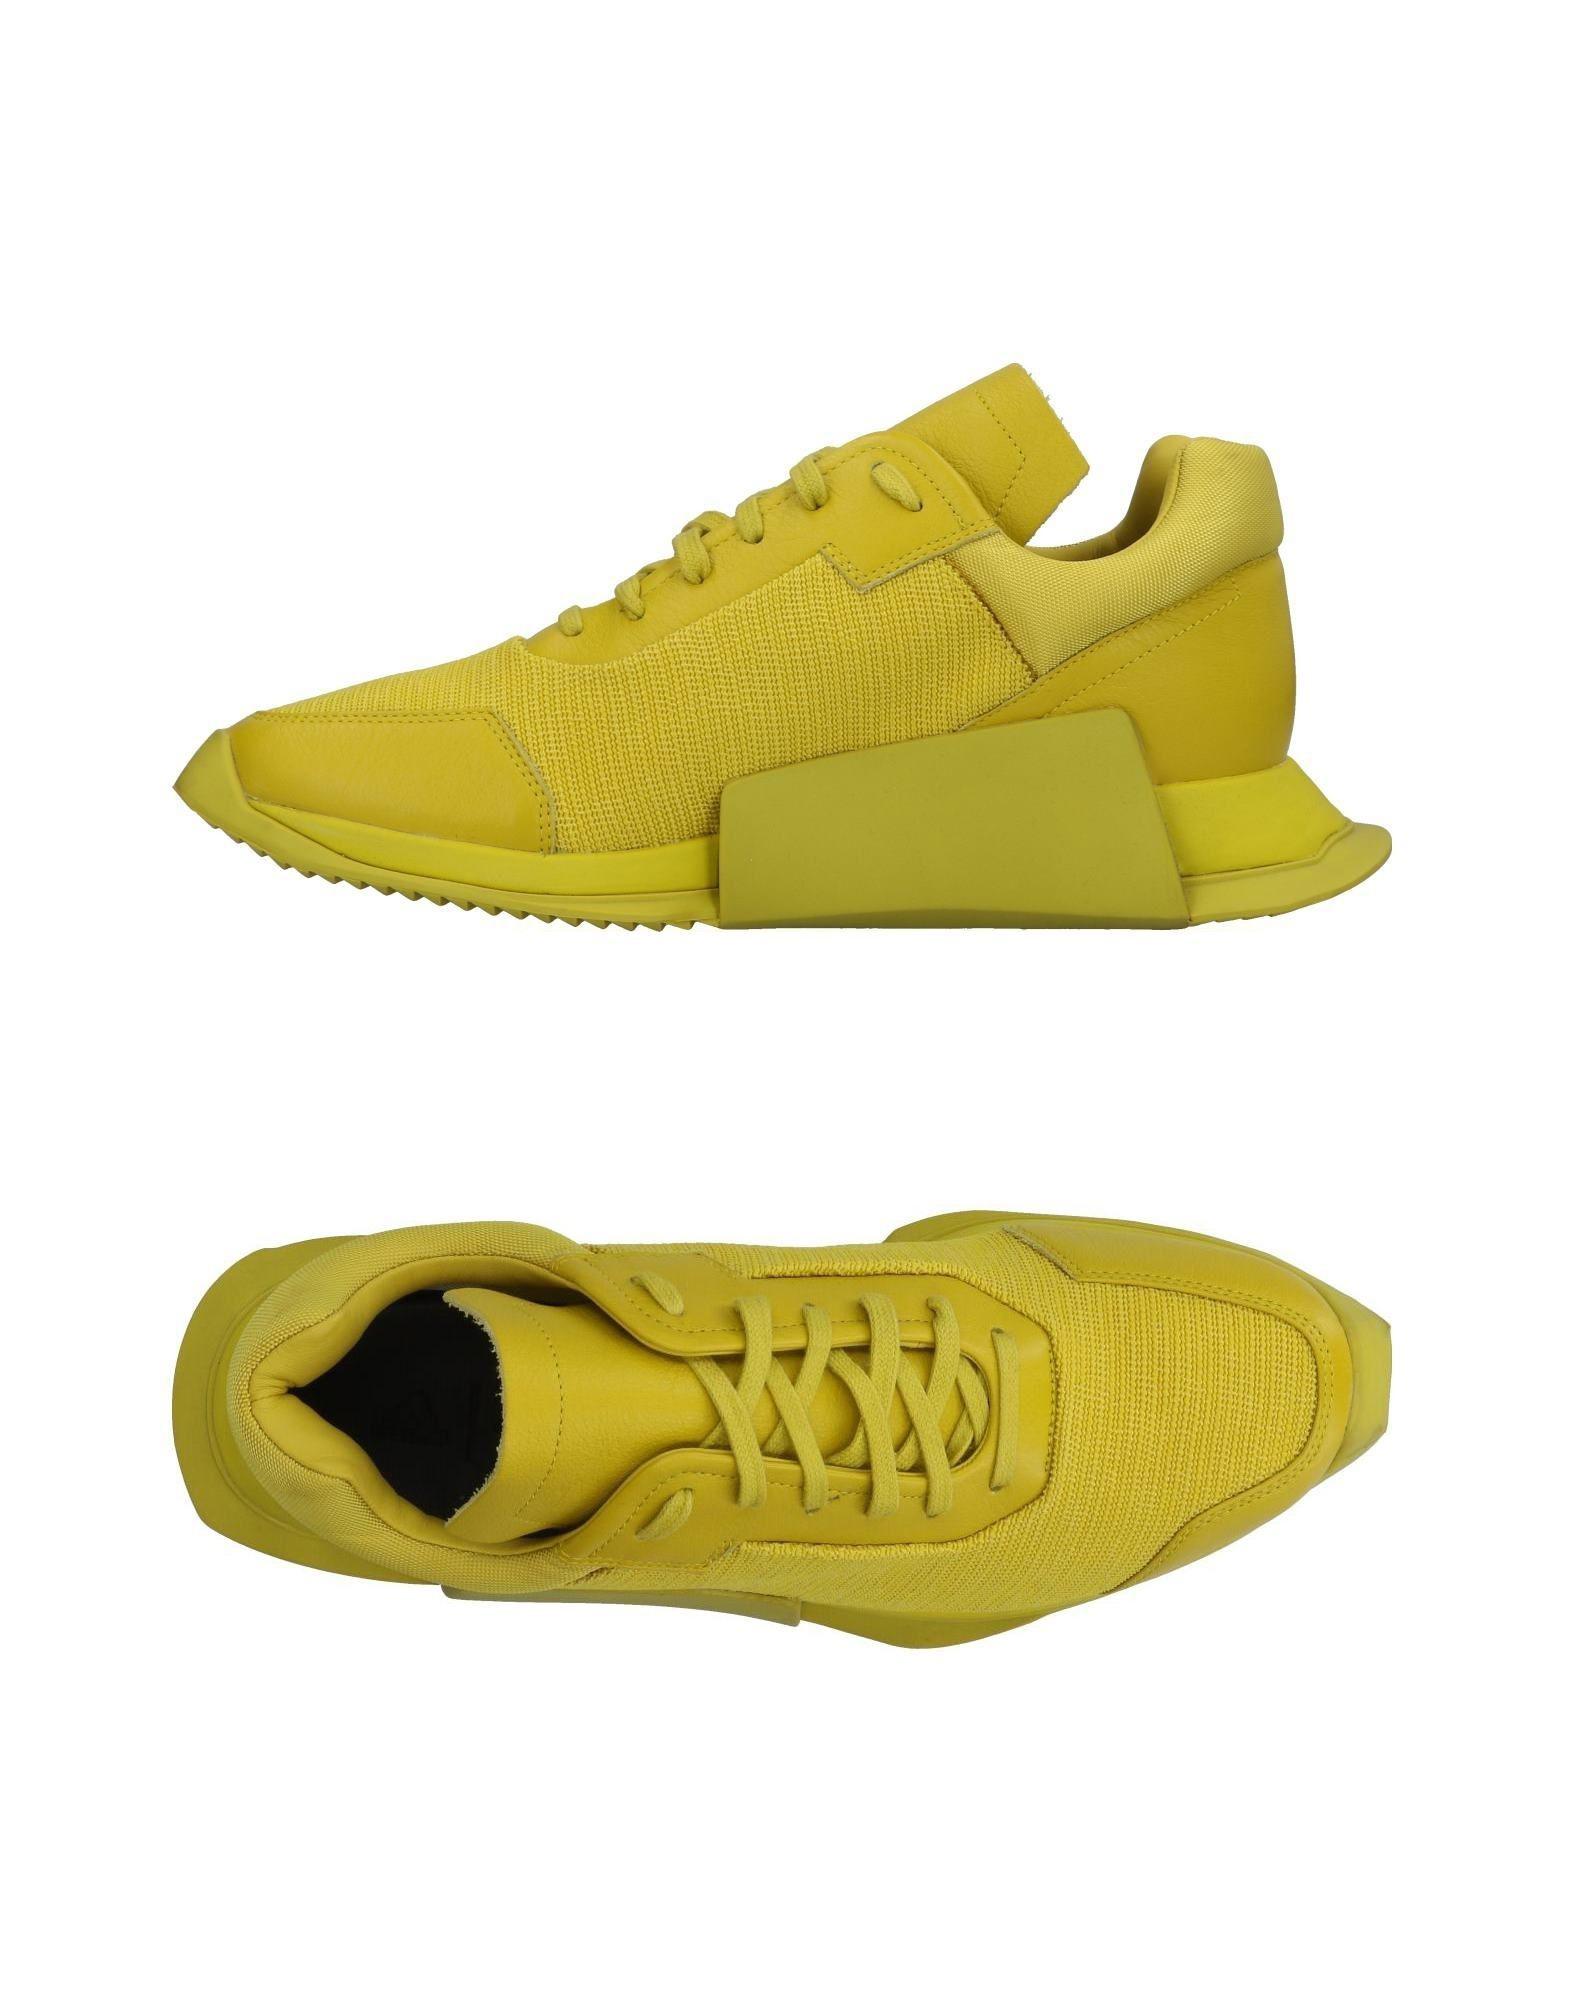 Rick Owens Leather Low-tops & Sneakers in Acid Green (Green) for Men - Lyst